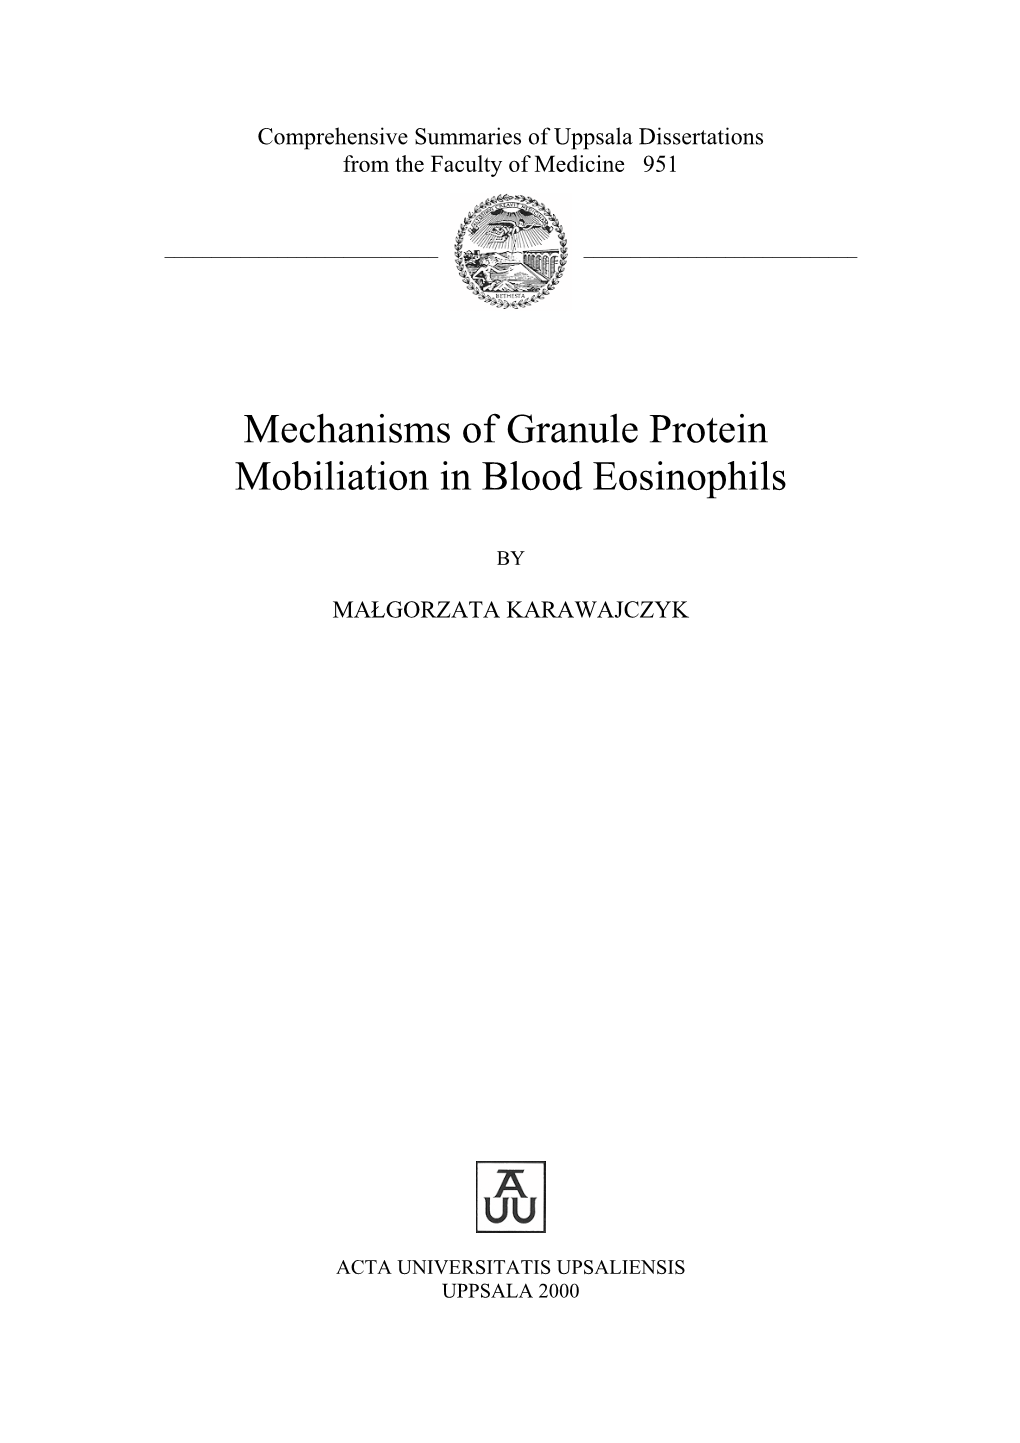 Mechanisms of Granule Protein Mobiliation in Blood Eosinophils